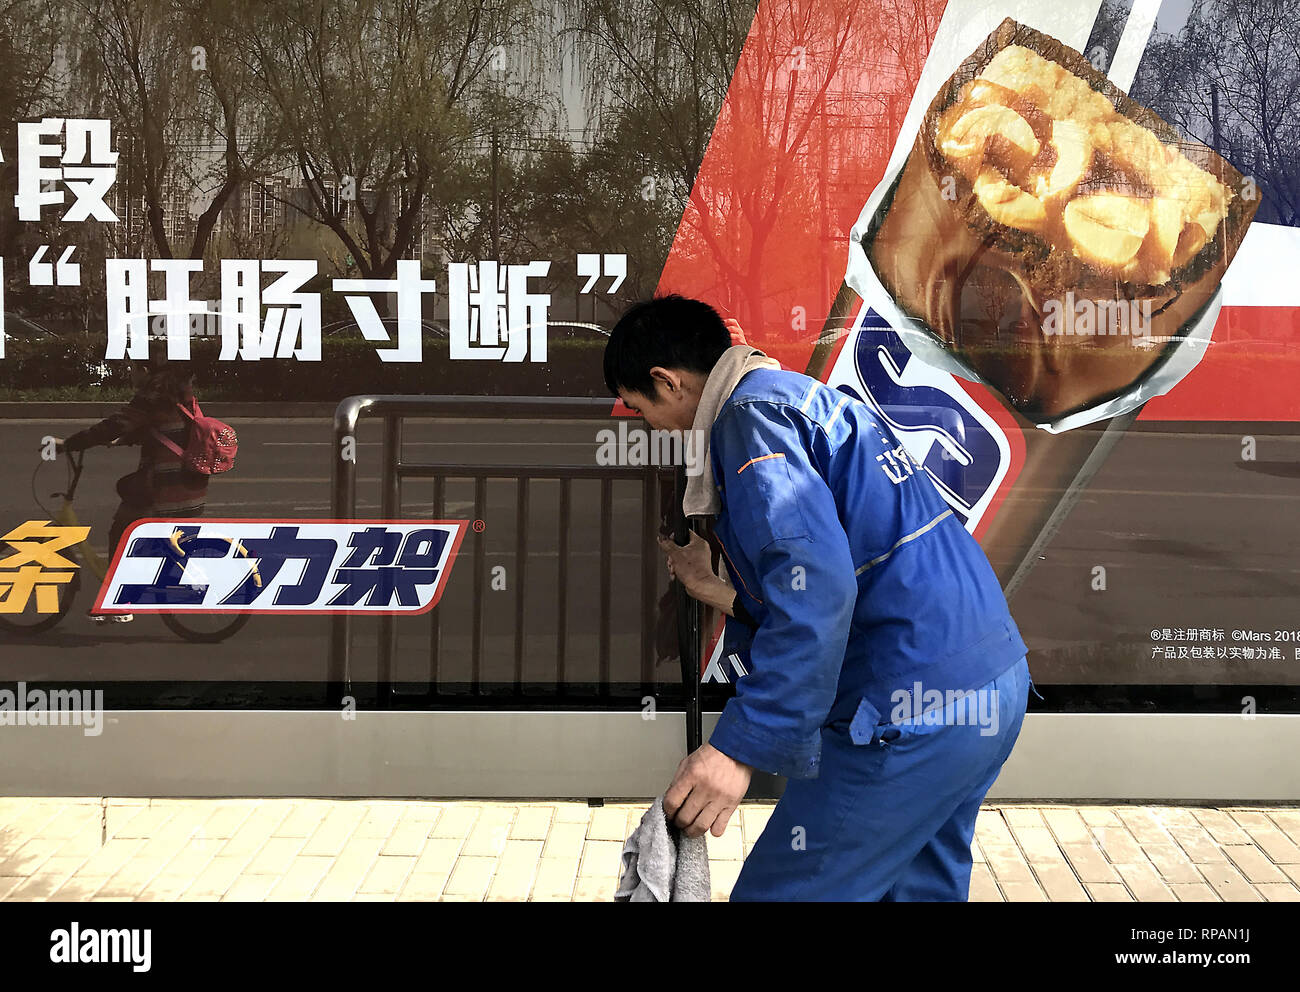 April 11, 2018 - Beijing, China - A Chinese worker cleans a sign advertising American Snicker bars in Beijing on April 11, 2018.  Chinese President Xi Jinping promised today to open China's economy even further for foreign investments and lower tariffs on foreign automobiles in hopes of avoiding a trade war the the U.S.. (Credit Image: © Todd Lee/ZUMAprilESS.com/ZUMA Wire) Stock Photo